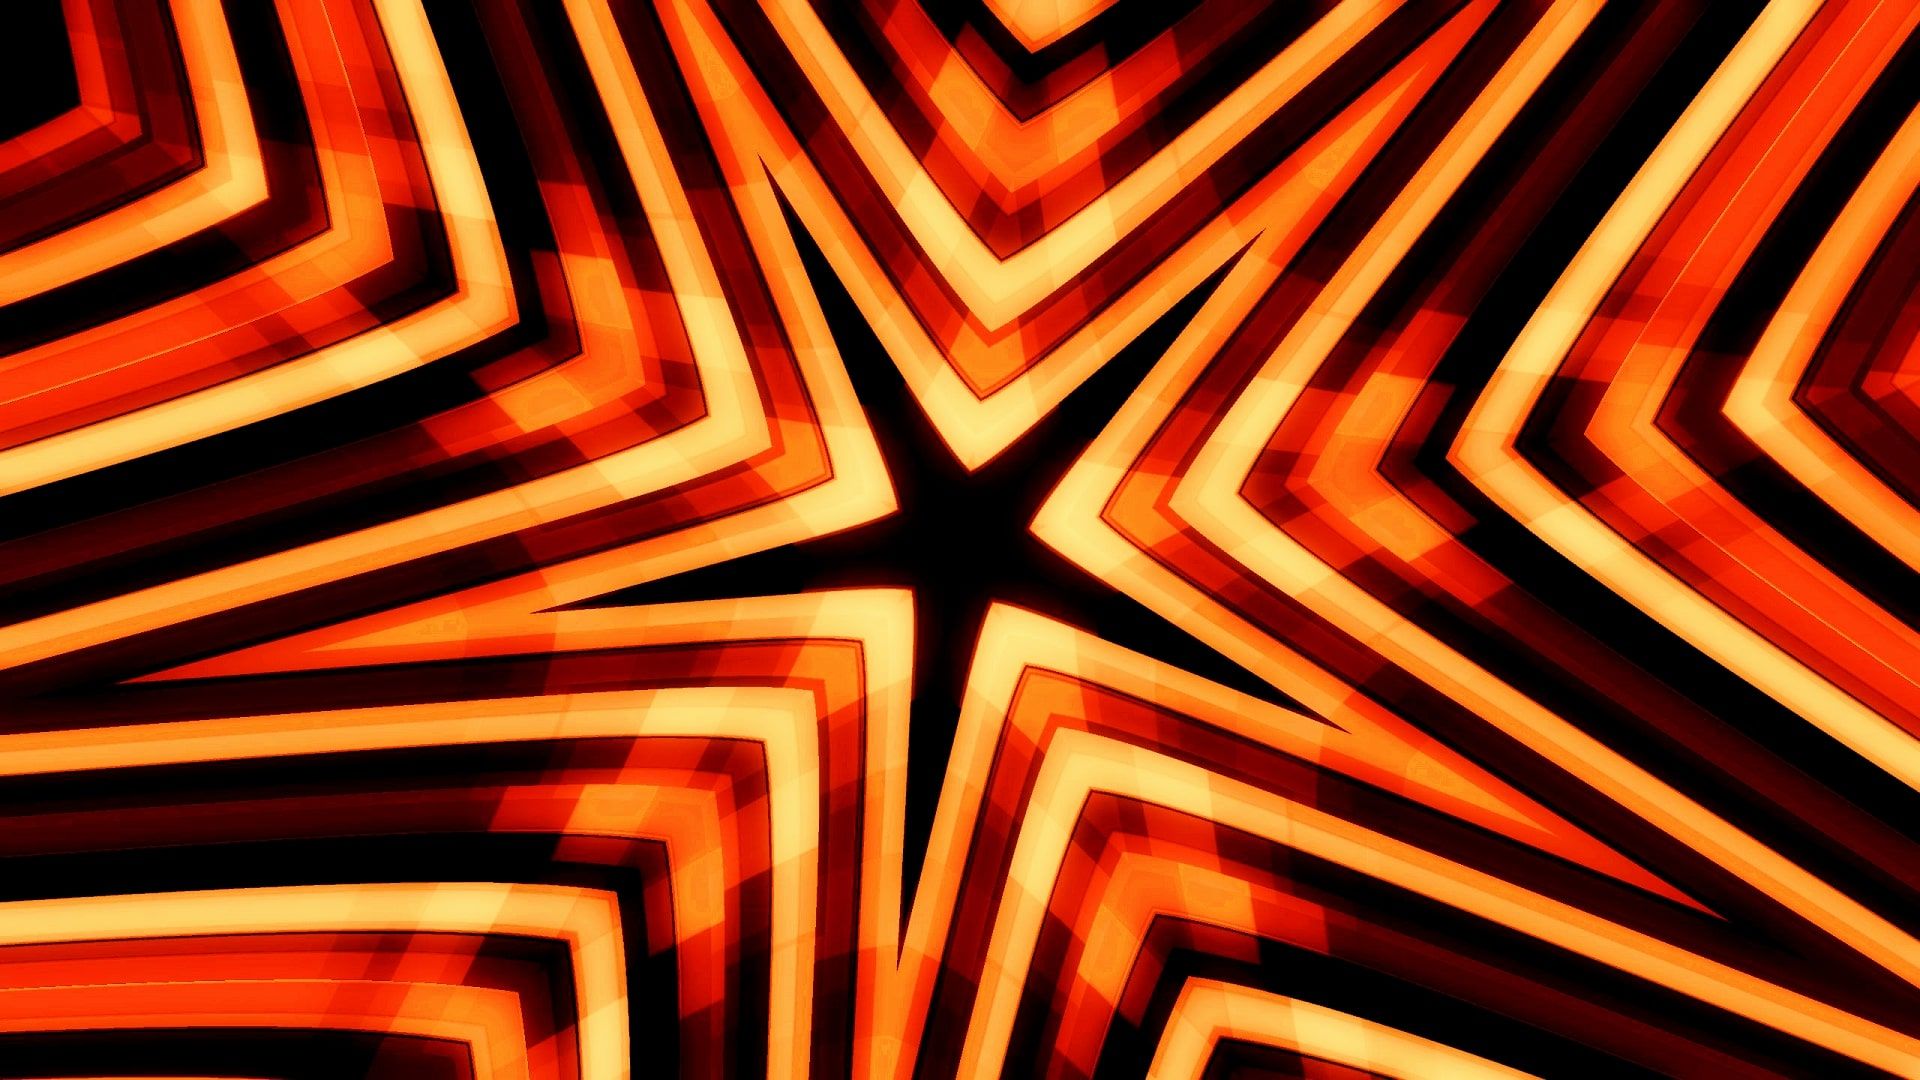 Wallpaper of Abstract, Artistic, Kaleidoscope, Star background